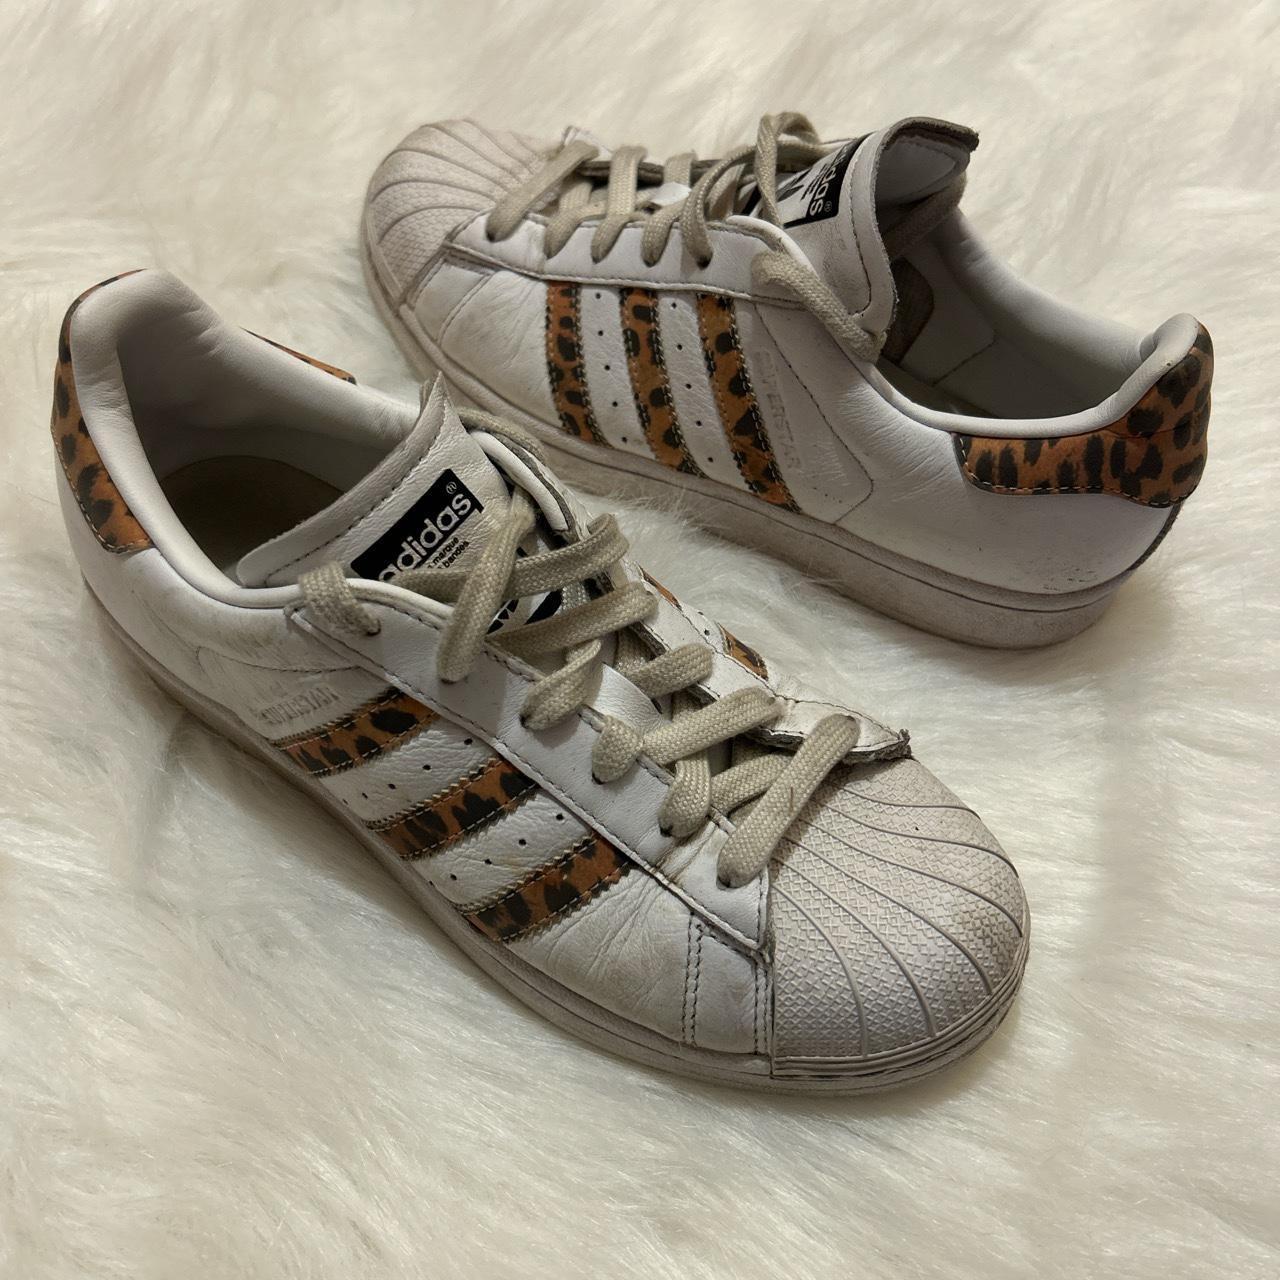 Leopard Adidas Sneakers at Nordstrom - The House of Sequins | Fashion shoes,  Outfit shoes, Crazy shoes